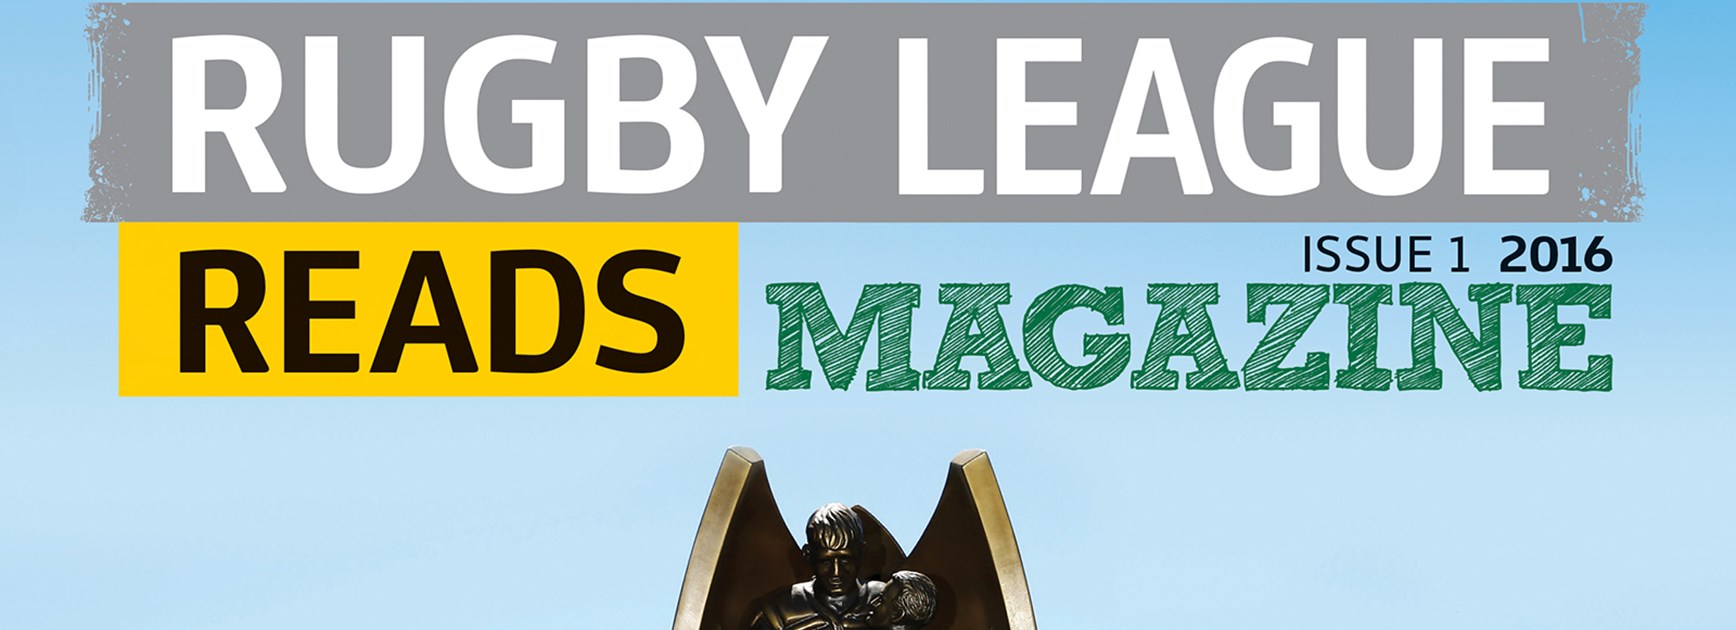 Help children discover their love of reading with Rugby League Reads.